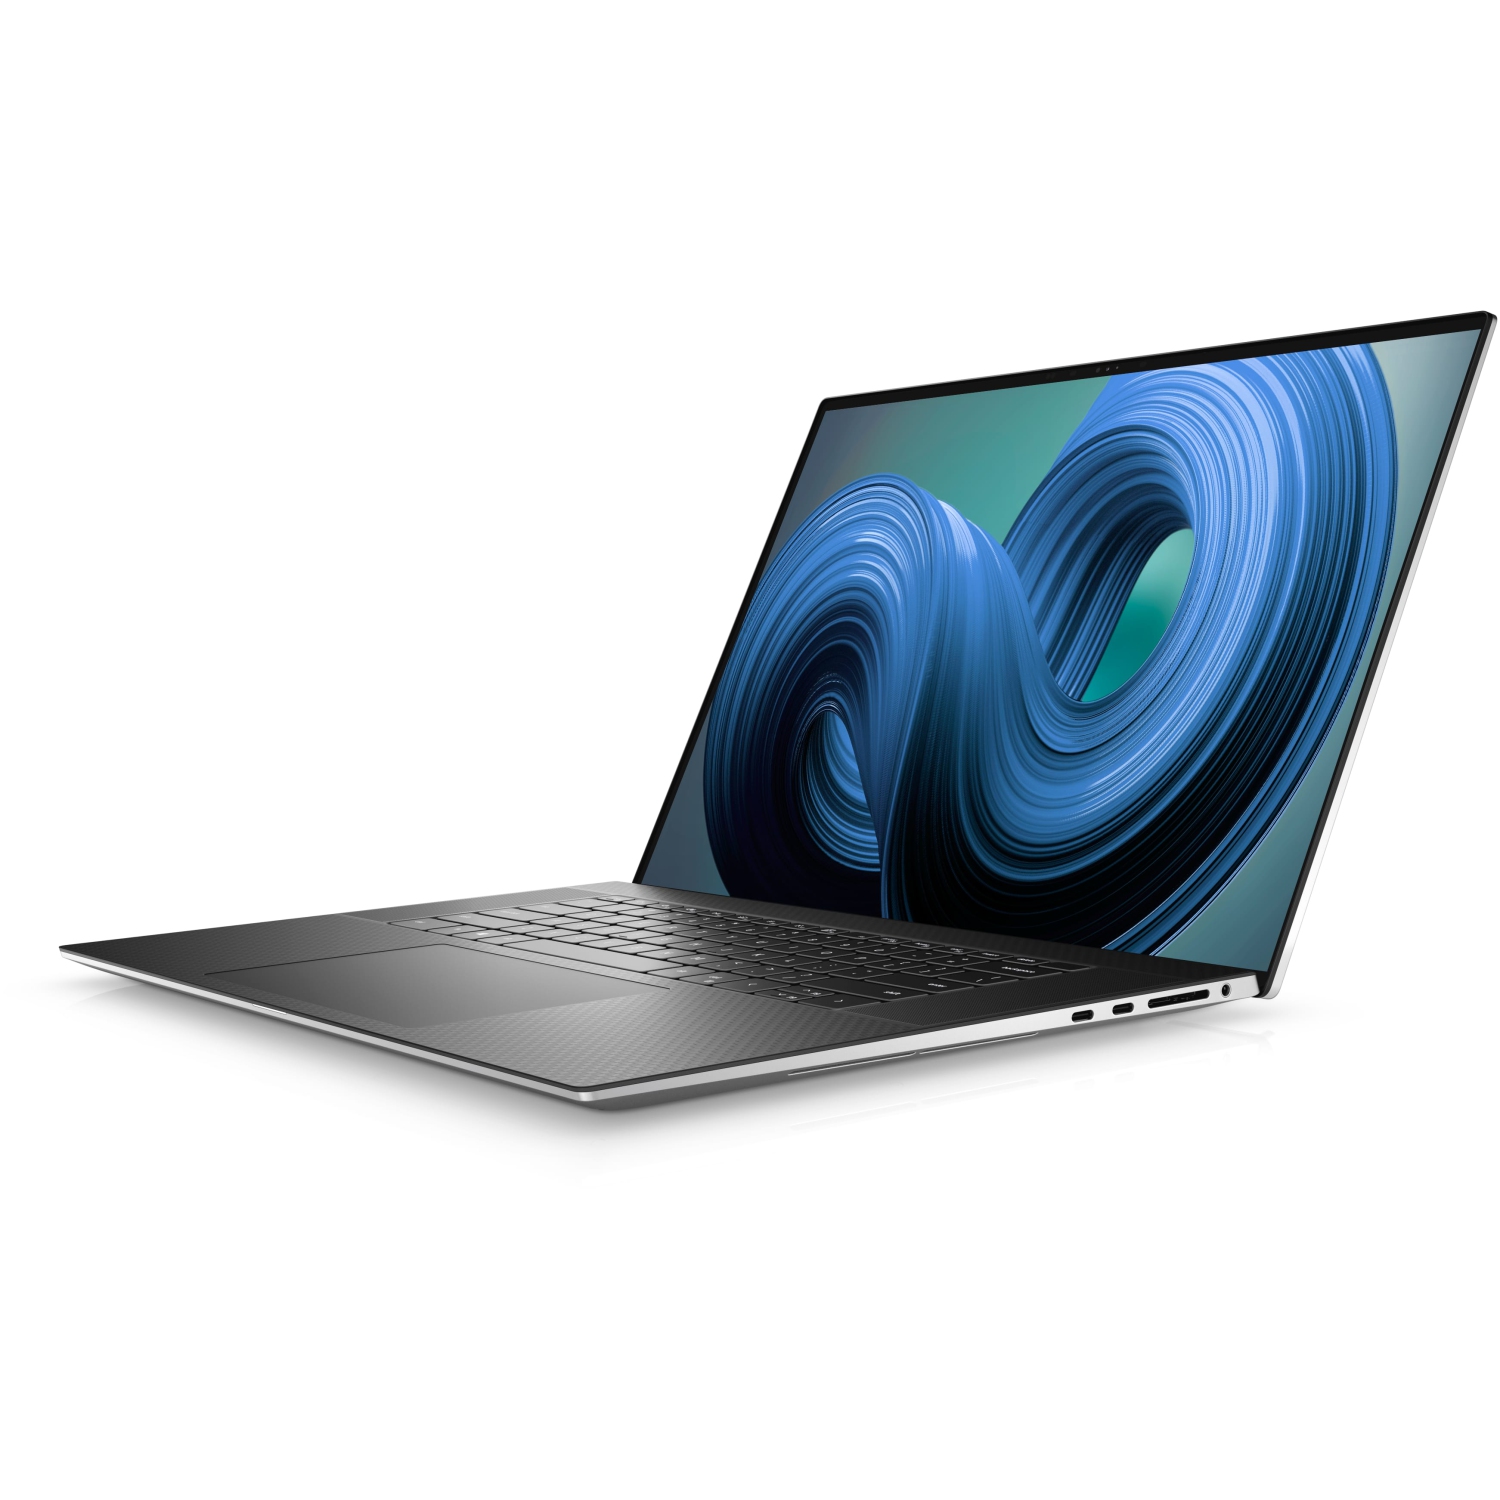 Refurbished (Excellent) – Dell XPS 9720 Laptop (2022) | 17" 4K Touch | Core i7 - 1TB SSD - 20GB RAM - RTX 3060 | 14 Cores @ 4.7 GHz - 12th Gen CPU - 12GB GDDR6